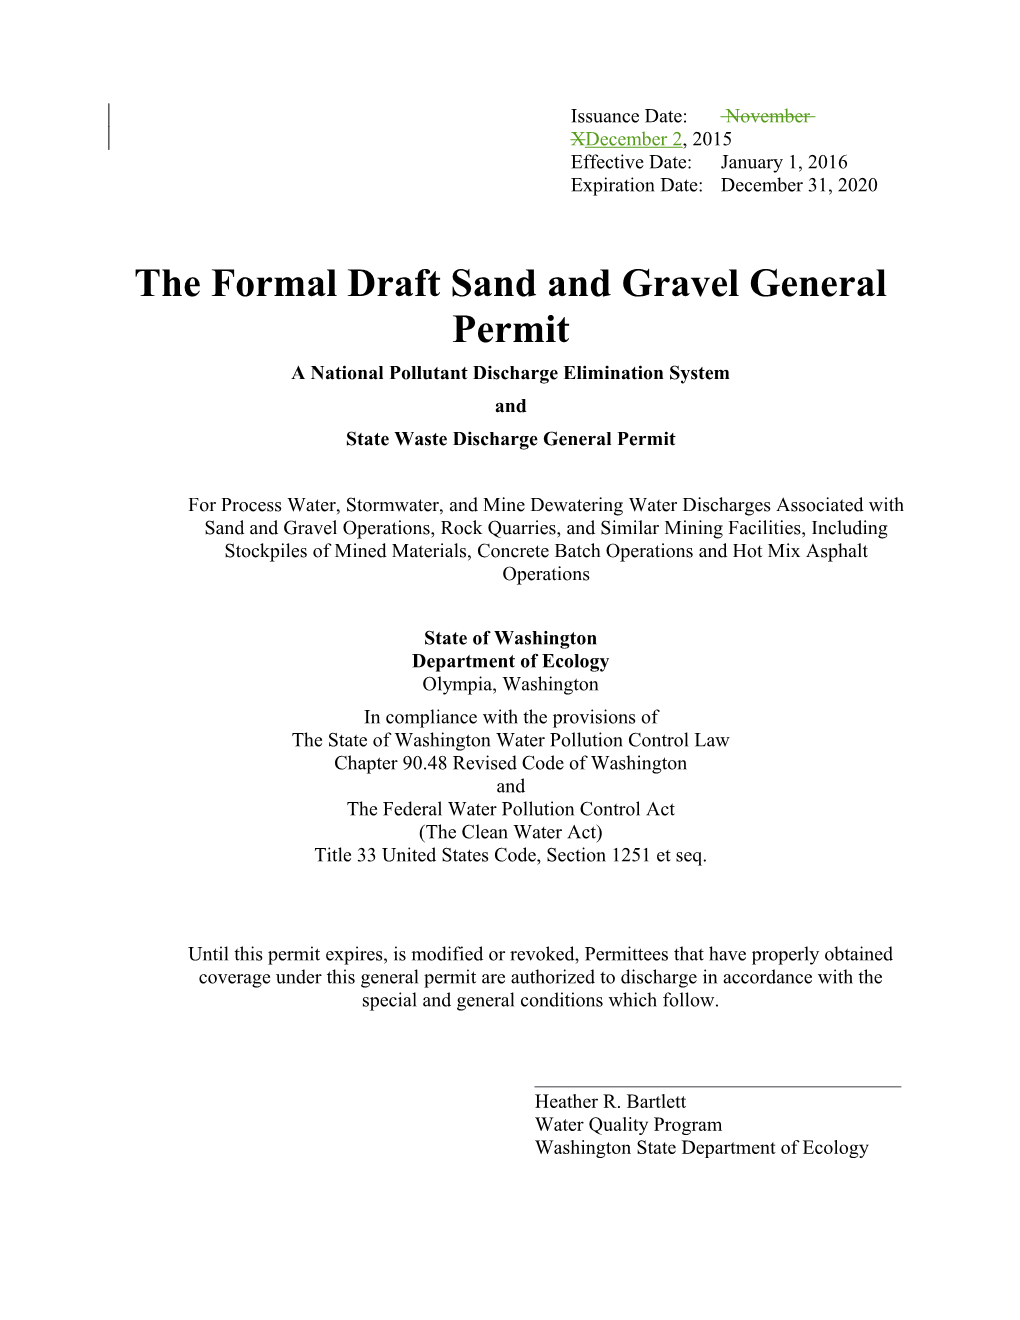 Formal Draft of the Sand & Gravel General Permit